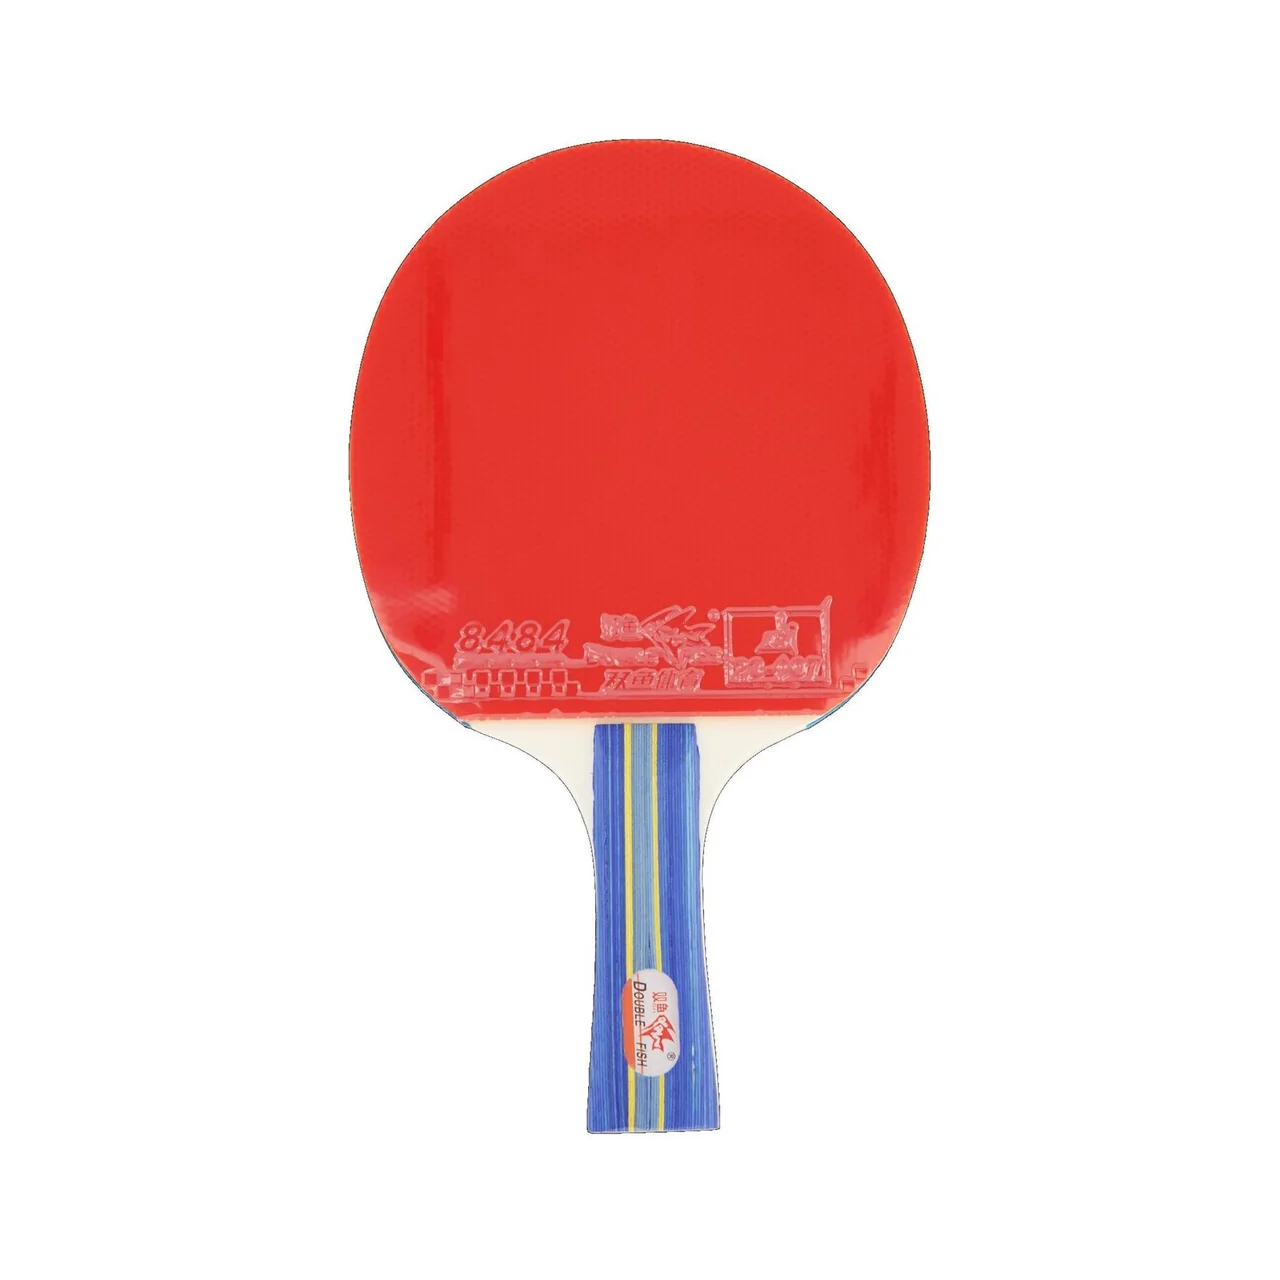 Double Fish Table Tennis Set 236A